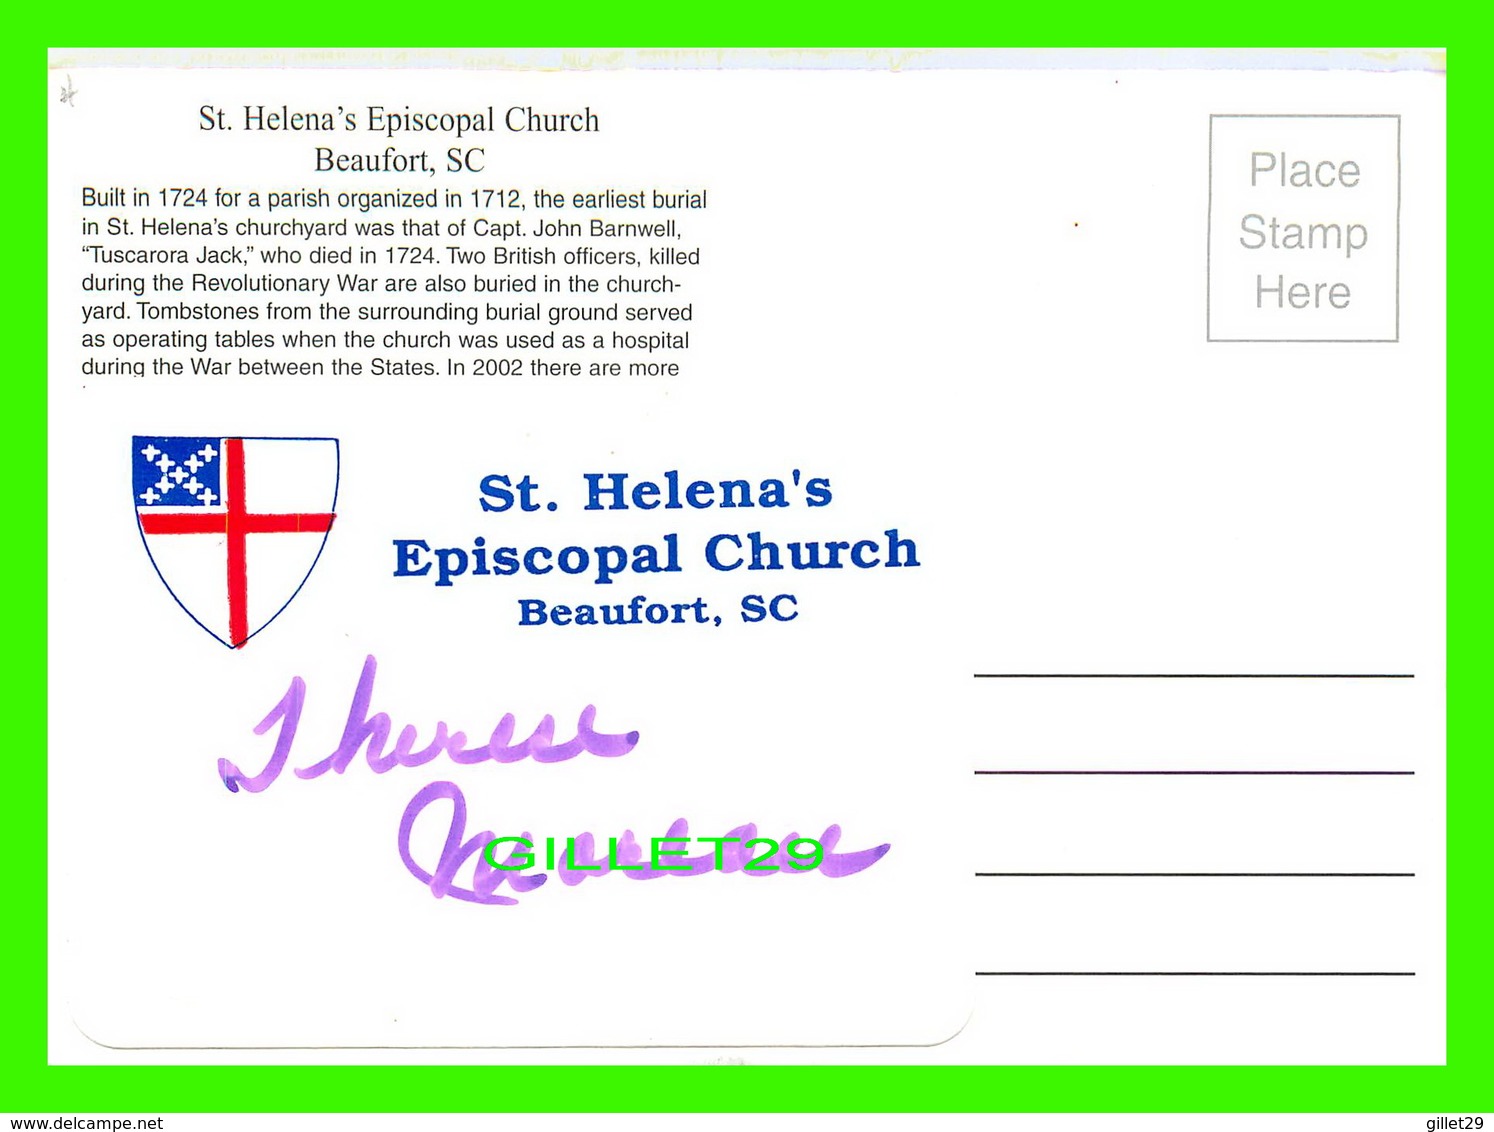 BEAUFORT, SC - ST HELENA'S EPISCOPAL CHURCH - BUILT IN 1724 FOR A PARRISH ORGANIZED IN 1712 - - Beaufort